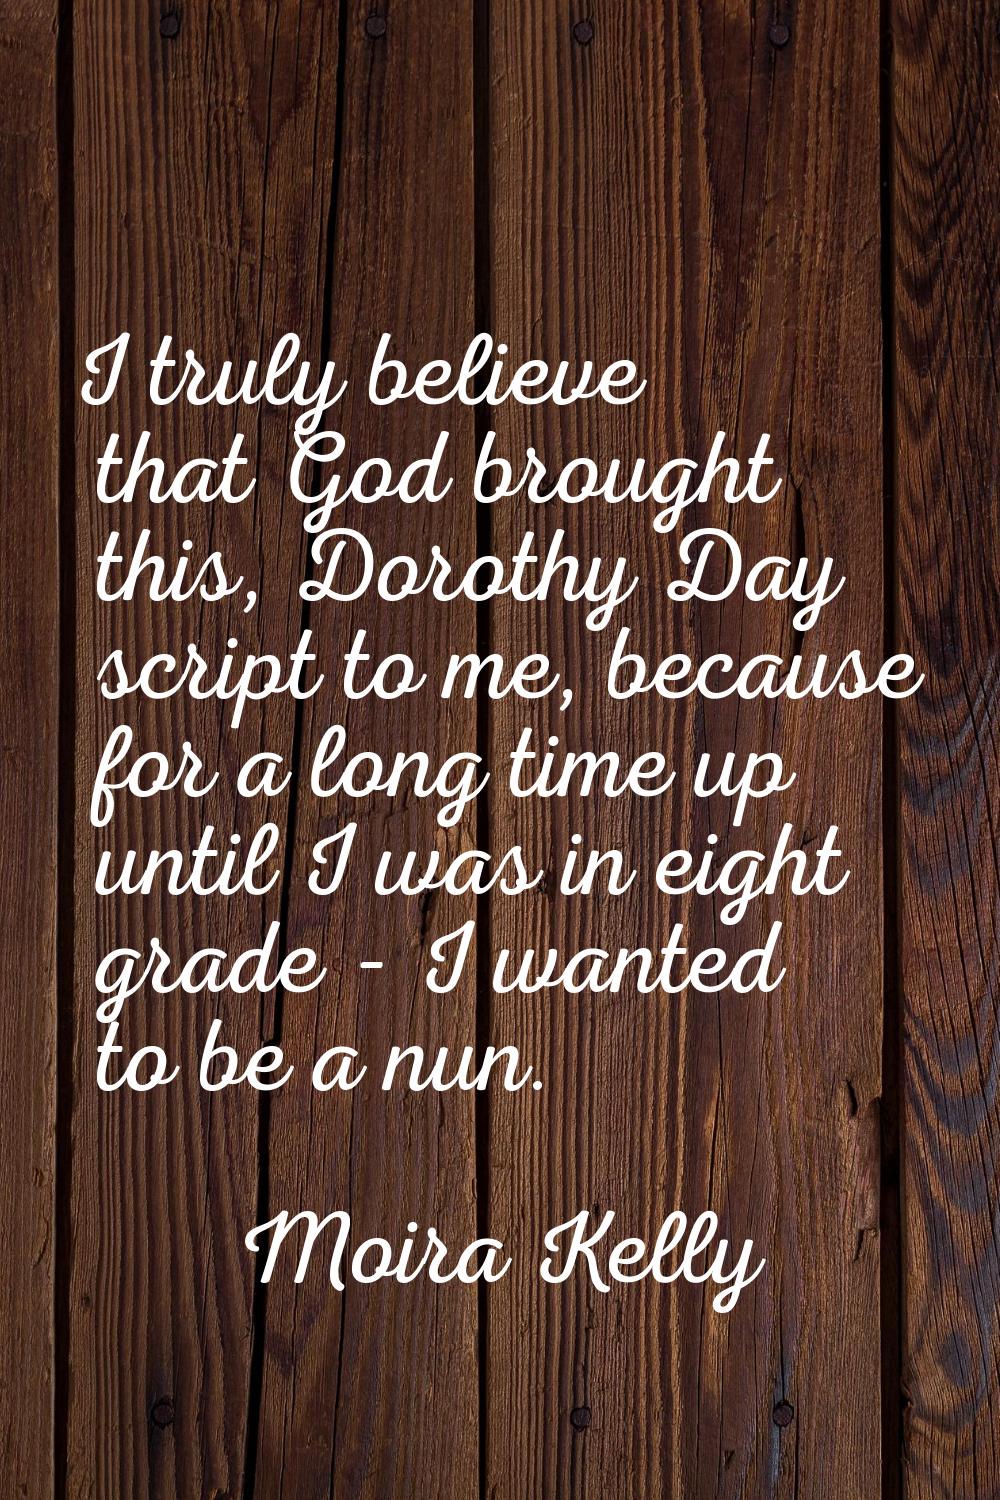 I truly believe that God brought this, Dorothy Day script to me, because for a long time up until I